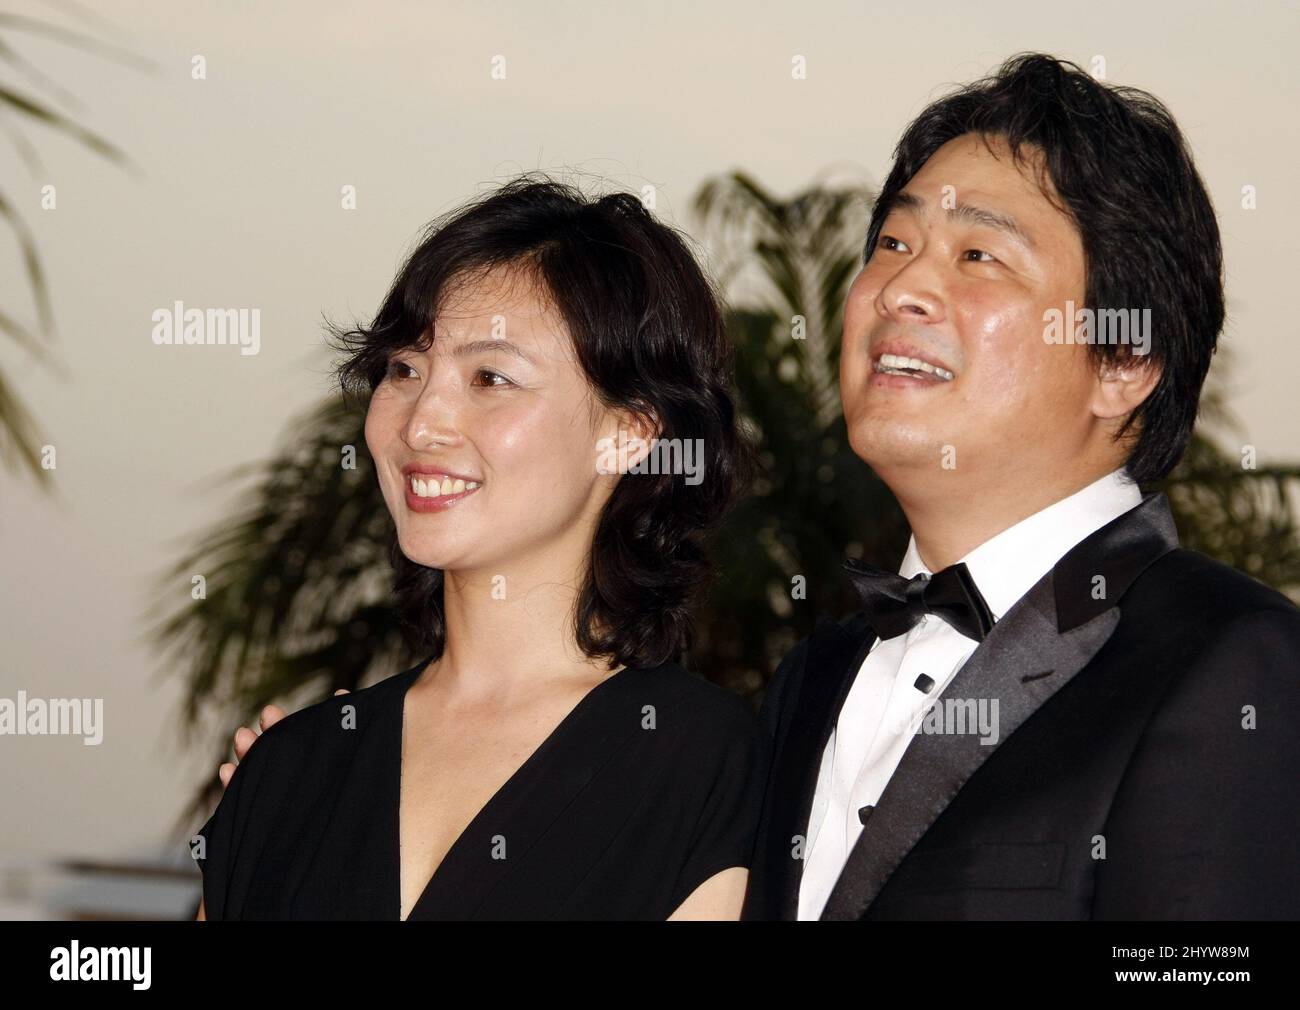 Actress Kim Ok-Vin and South Korean director Park Chan-Wook pose with the Jury Prize award he received for the film 'Bak-Jwi', at a photo call following the awards ceremony, during the 62nd International film festival in Cannes Stock Photo